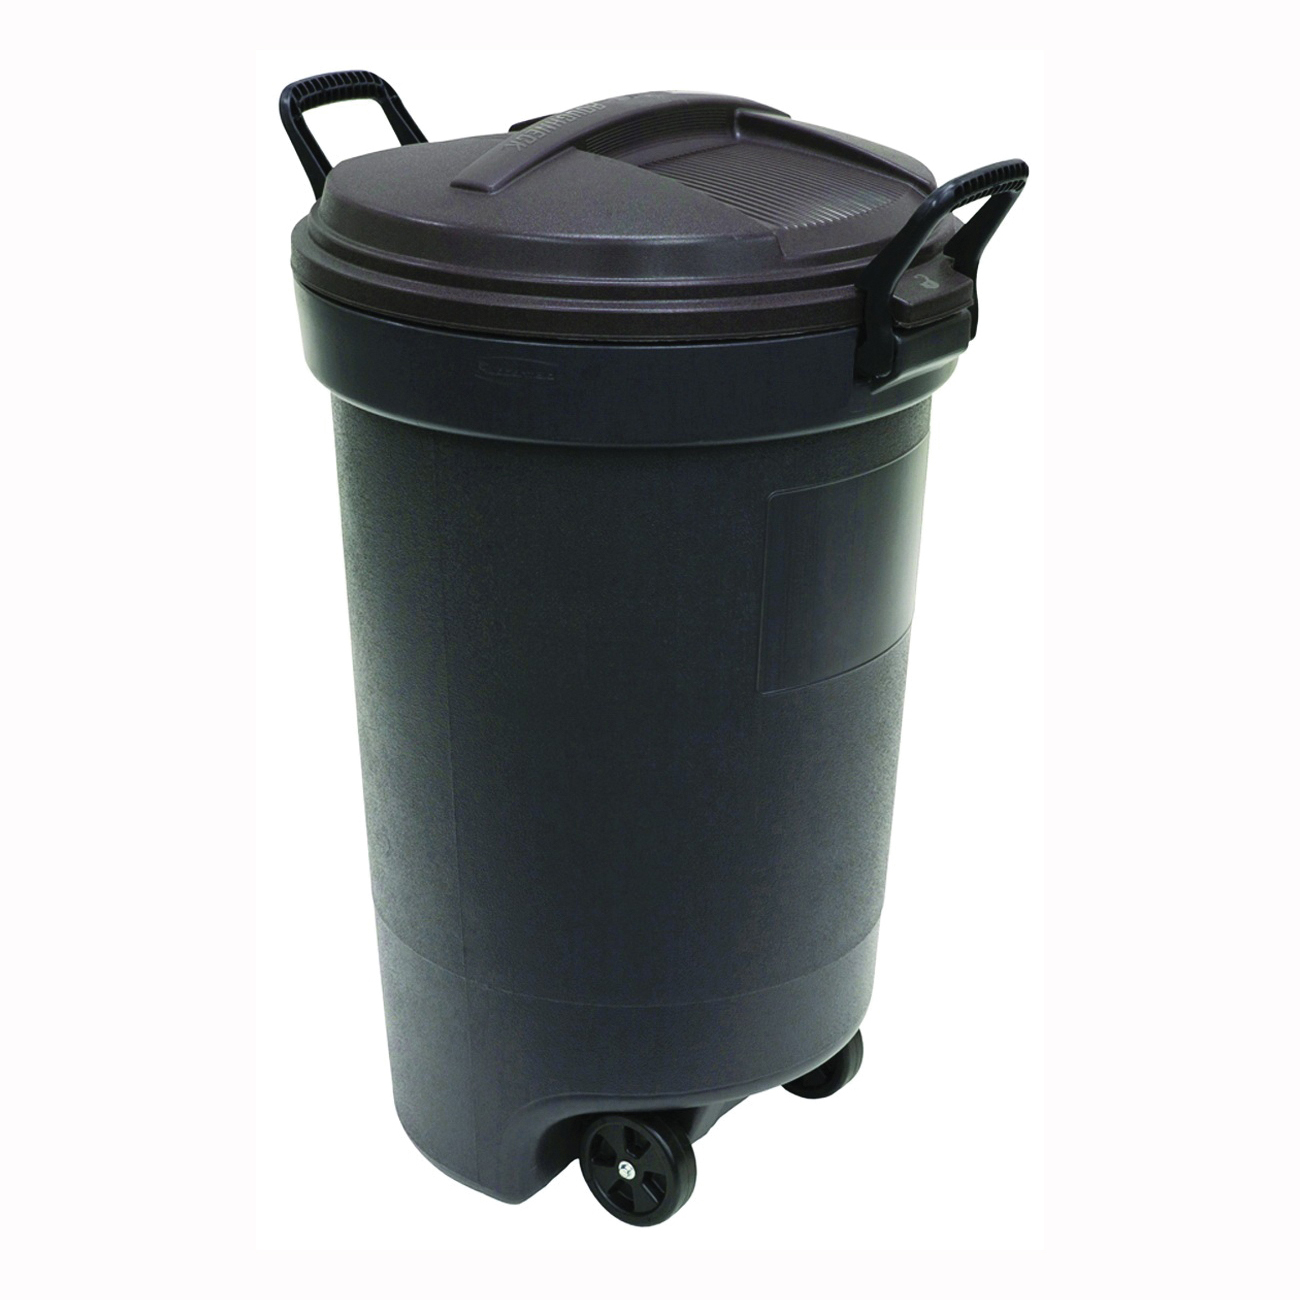 Rubbermaid Roughneck 32 Gal Outdoor Recycling Bin Wastebasket With Snap-Fit Lid 